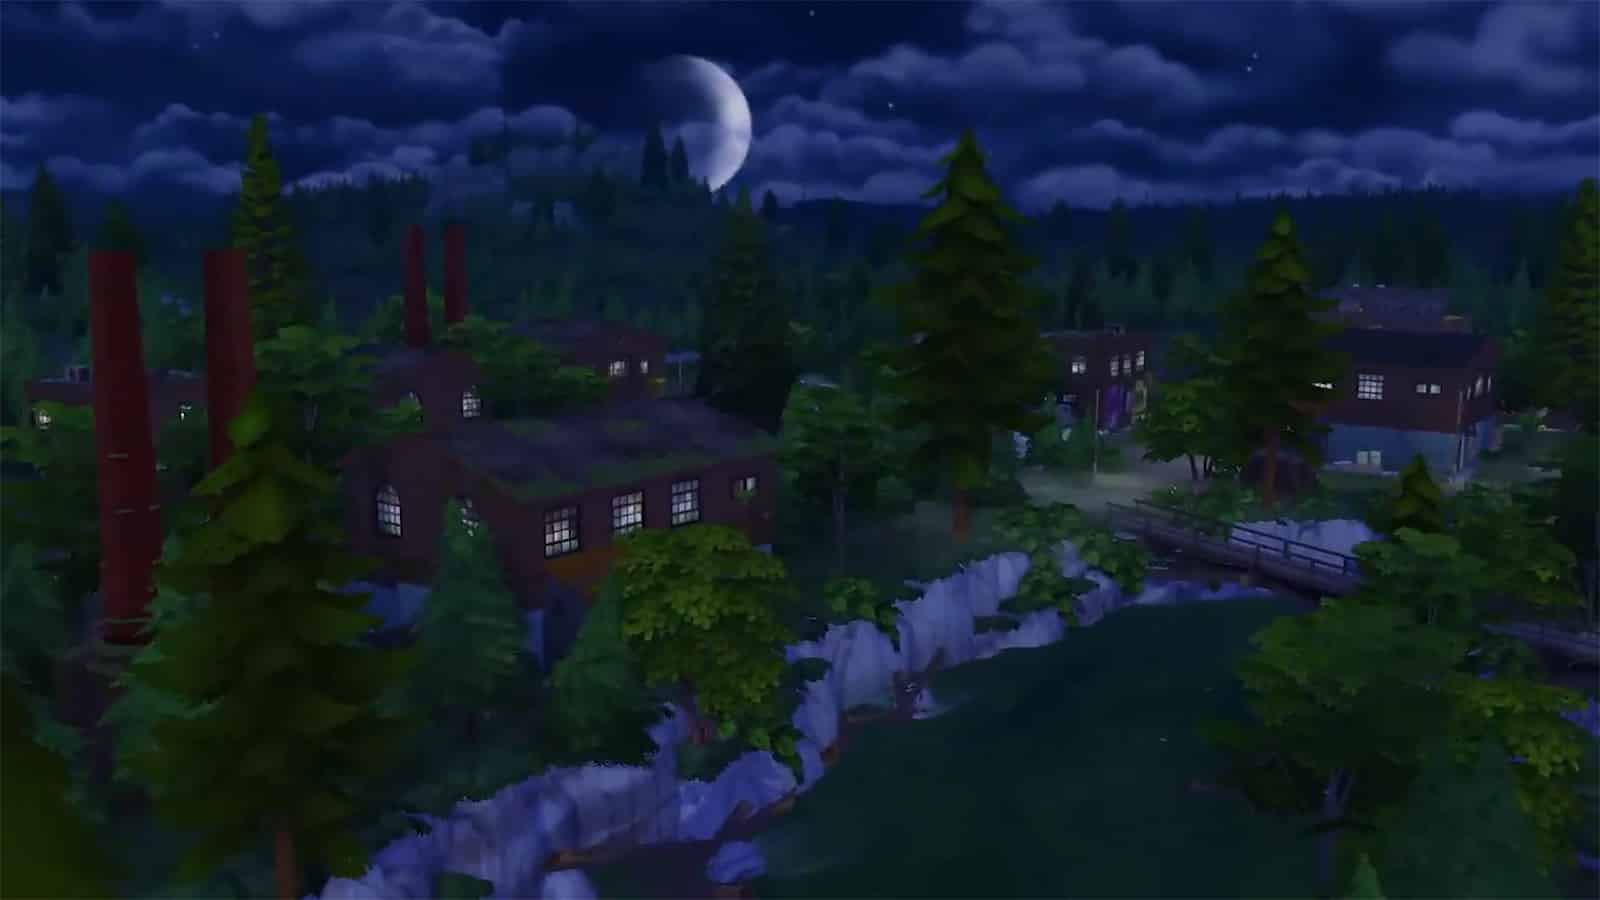 Moonwood Mill at night time in The Sims 4